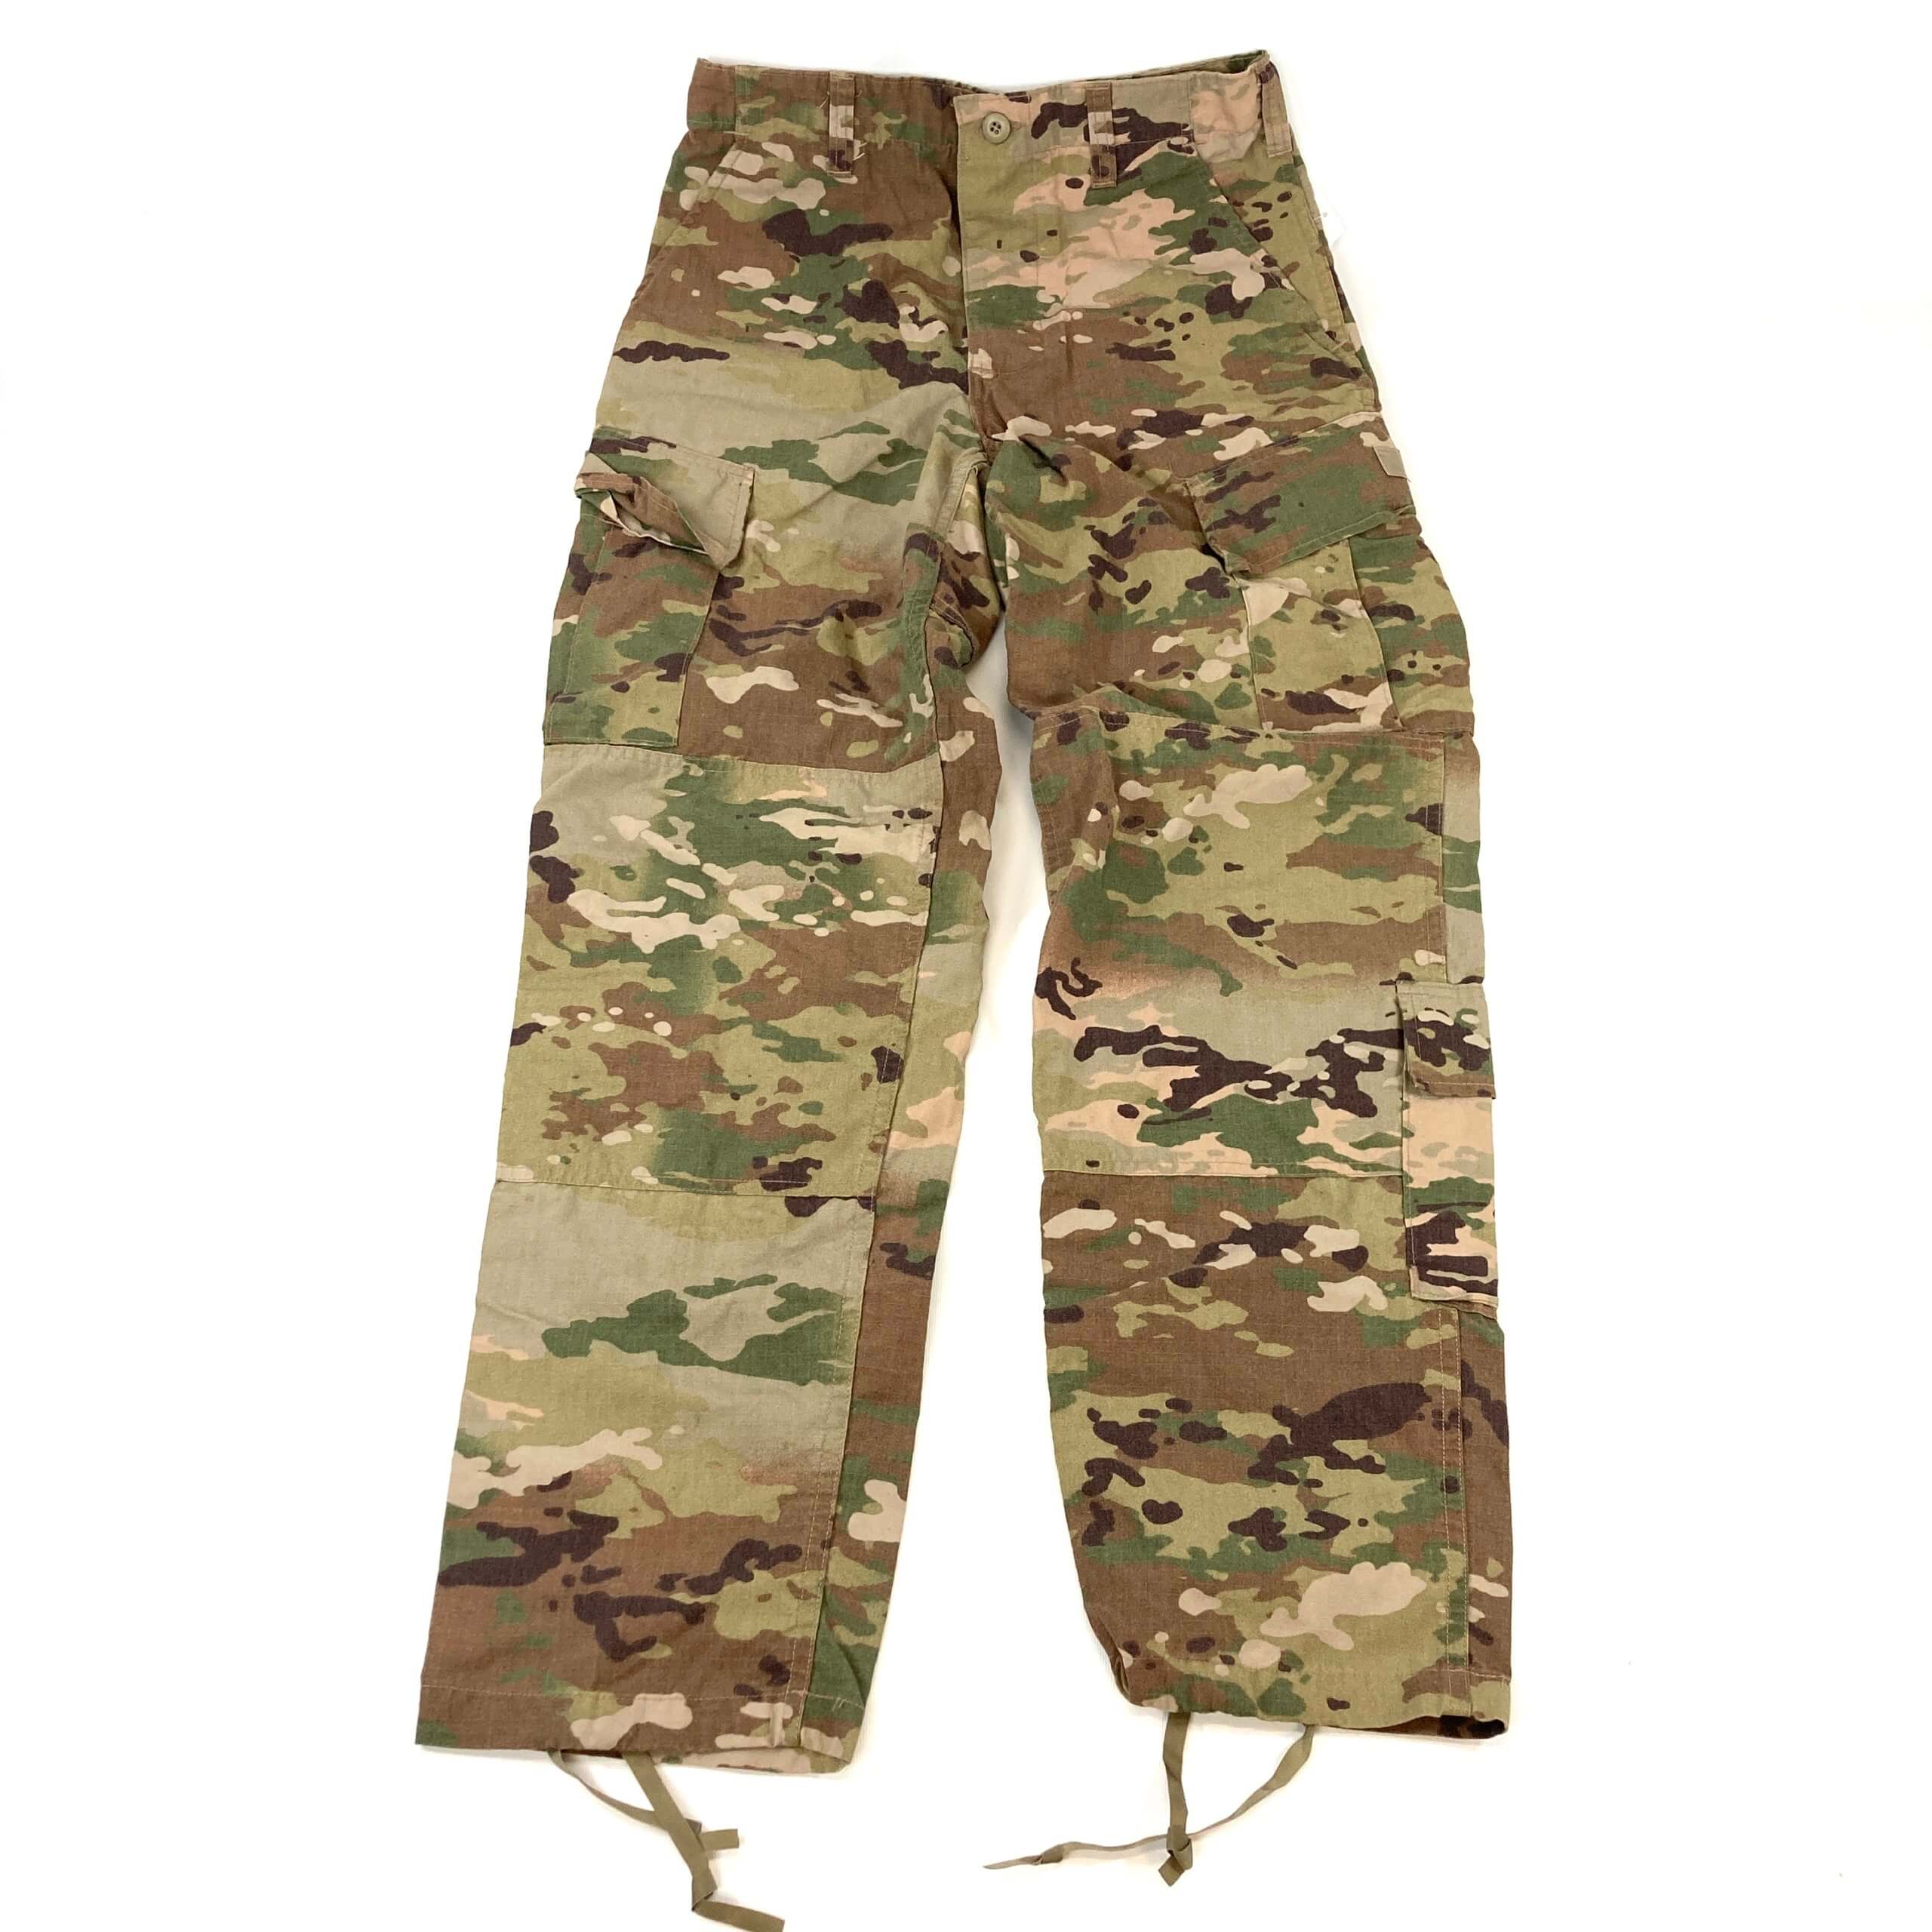 ARMY ISSUE OCP MULTICAM FLAME RESISTANT CARGO PANTS TACTICAL MILITARY TROUSERS 